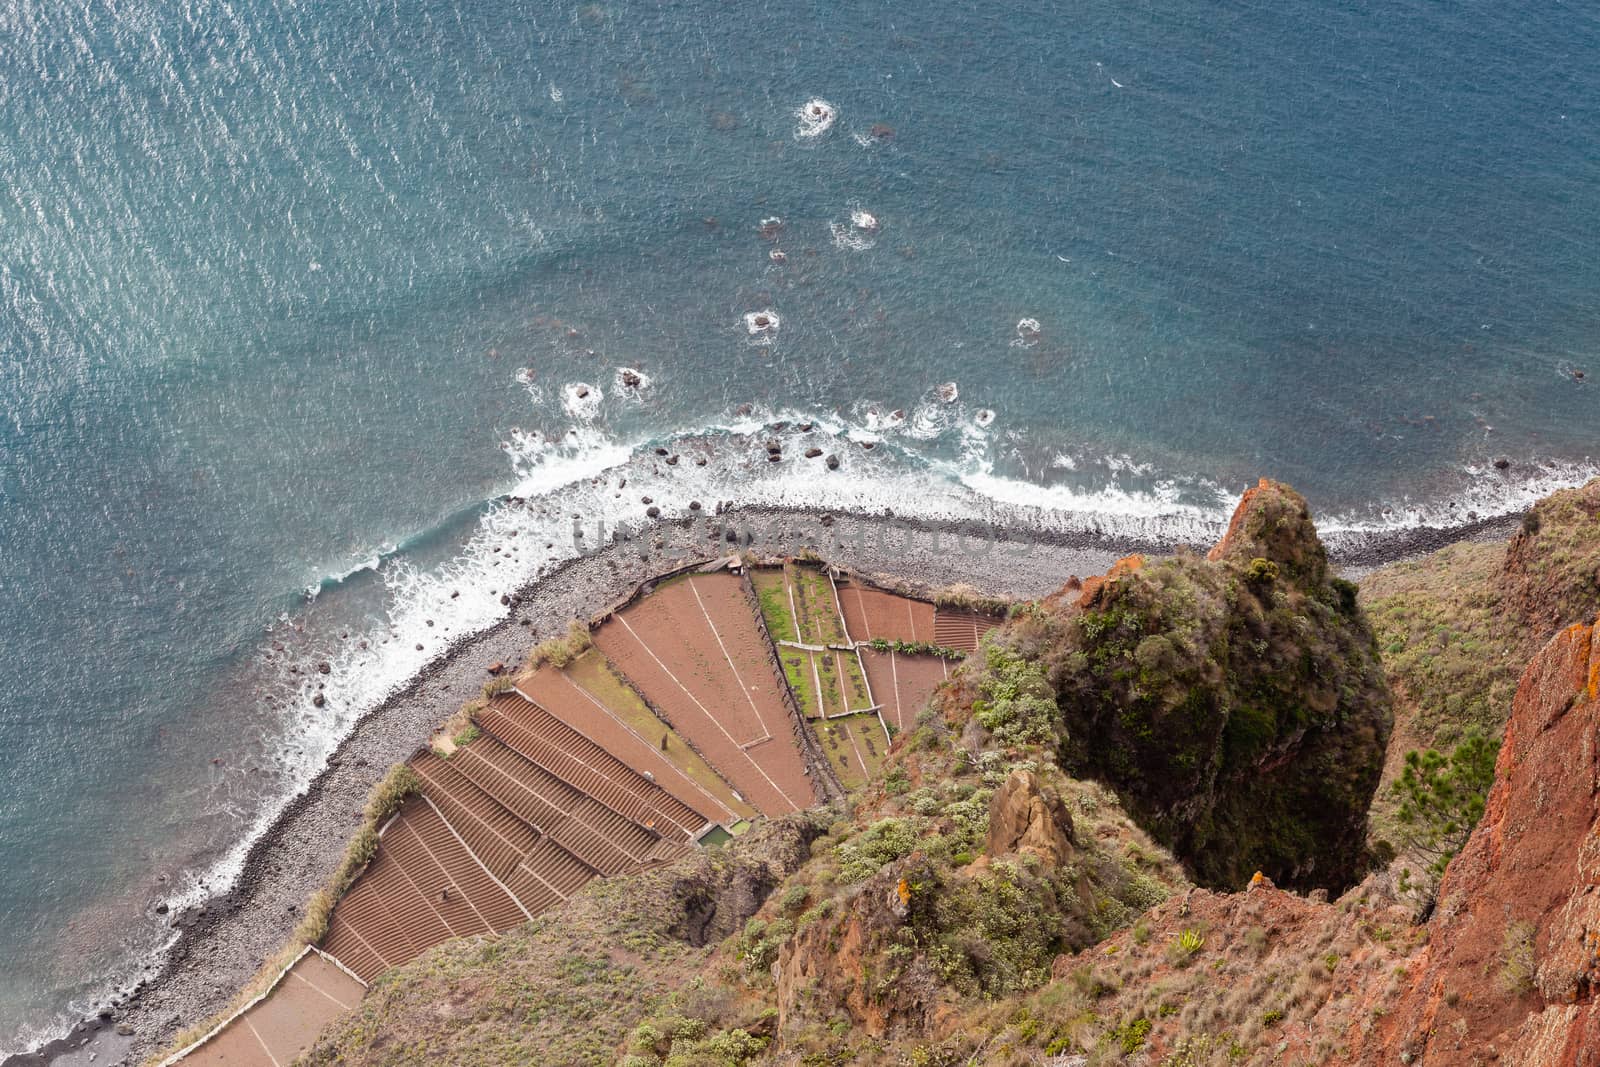 The Cabo Girao Viewpoint is on the Portuguese island of Madeira and is an elevated viewpoint offering panoramic views over the ocean.